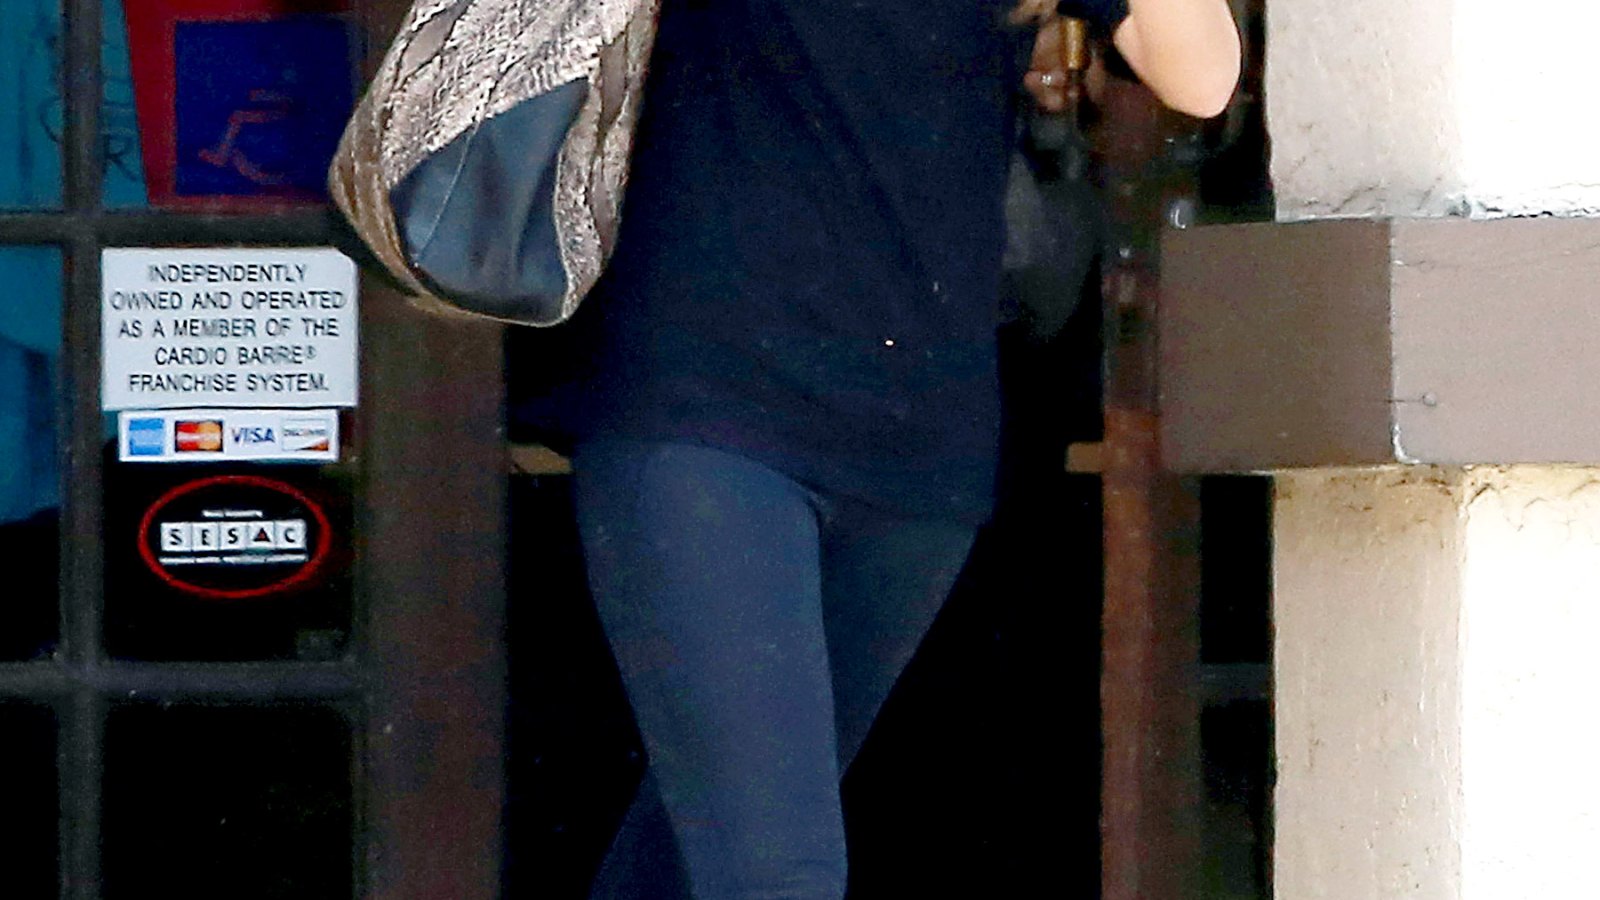 Amanda Bynes leaves Cardio Barre in Thousand Oaks on May 28, 2014